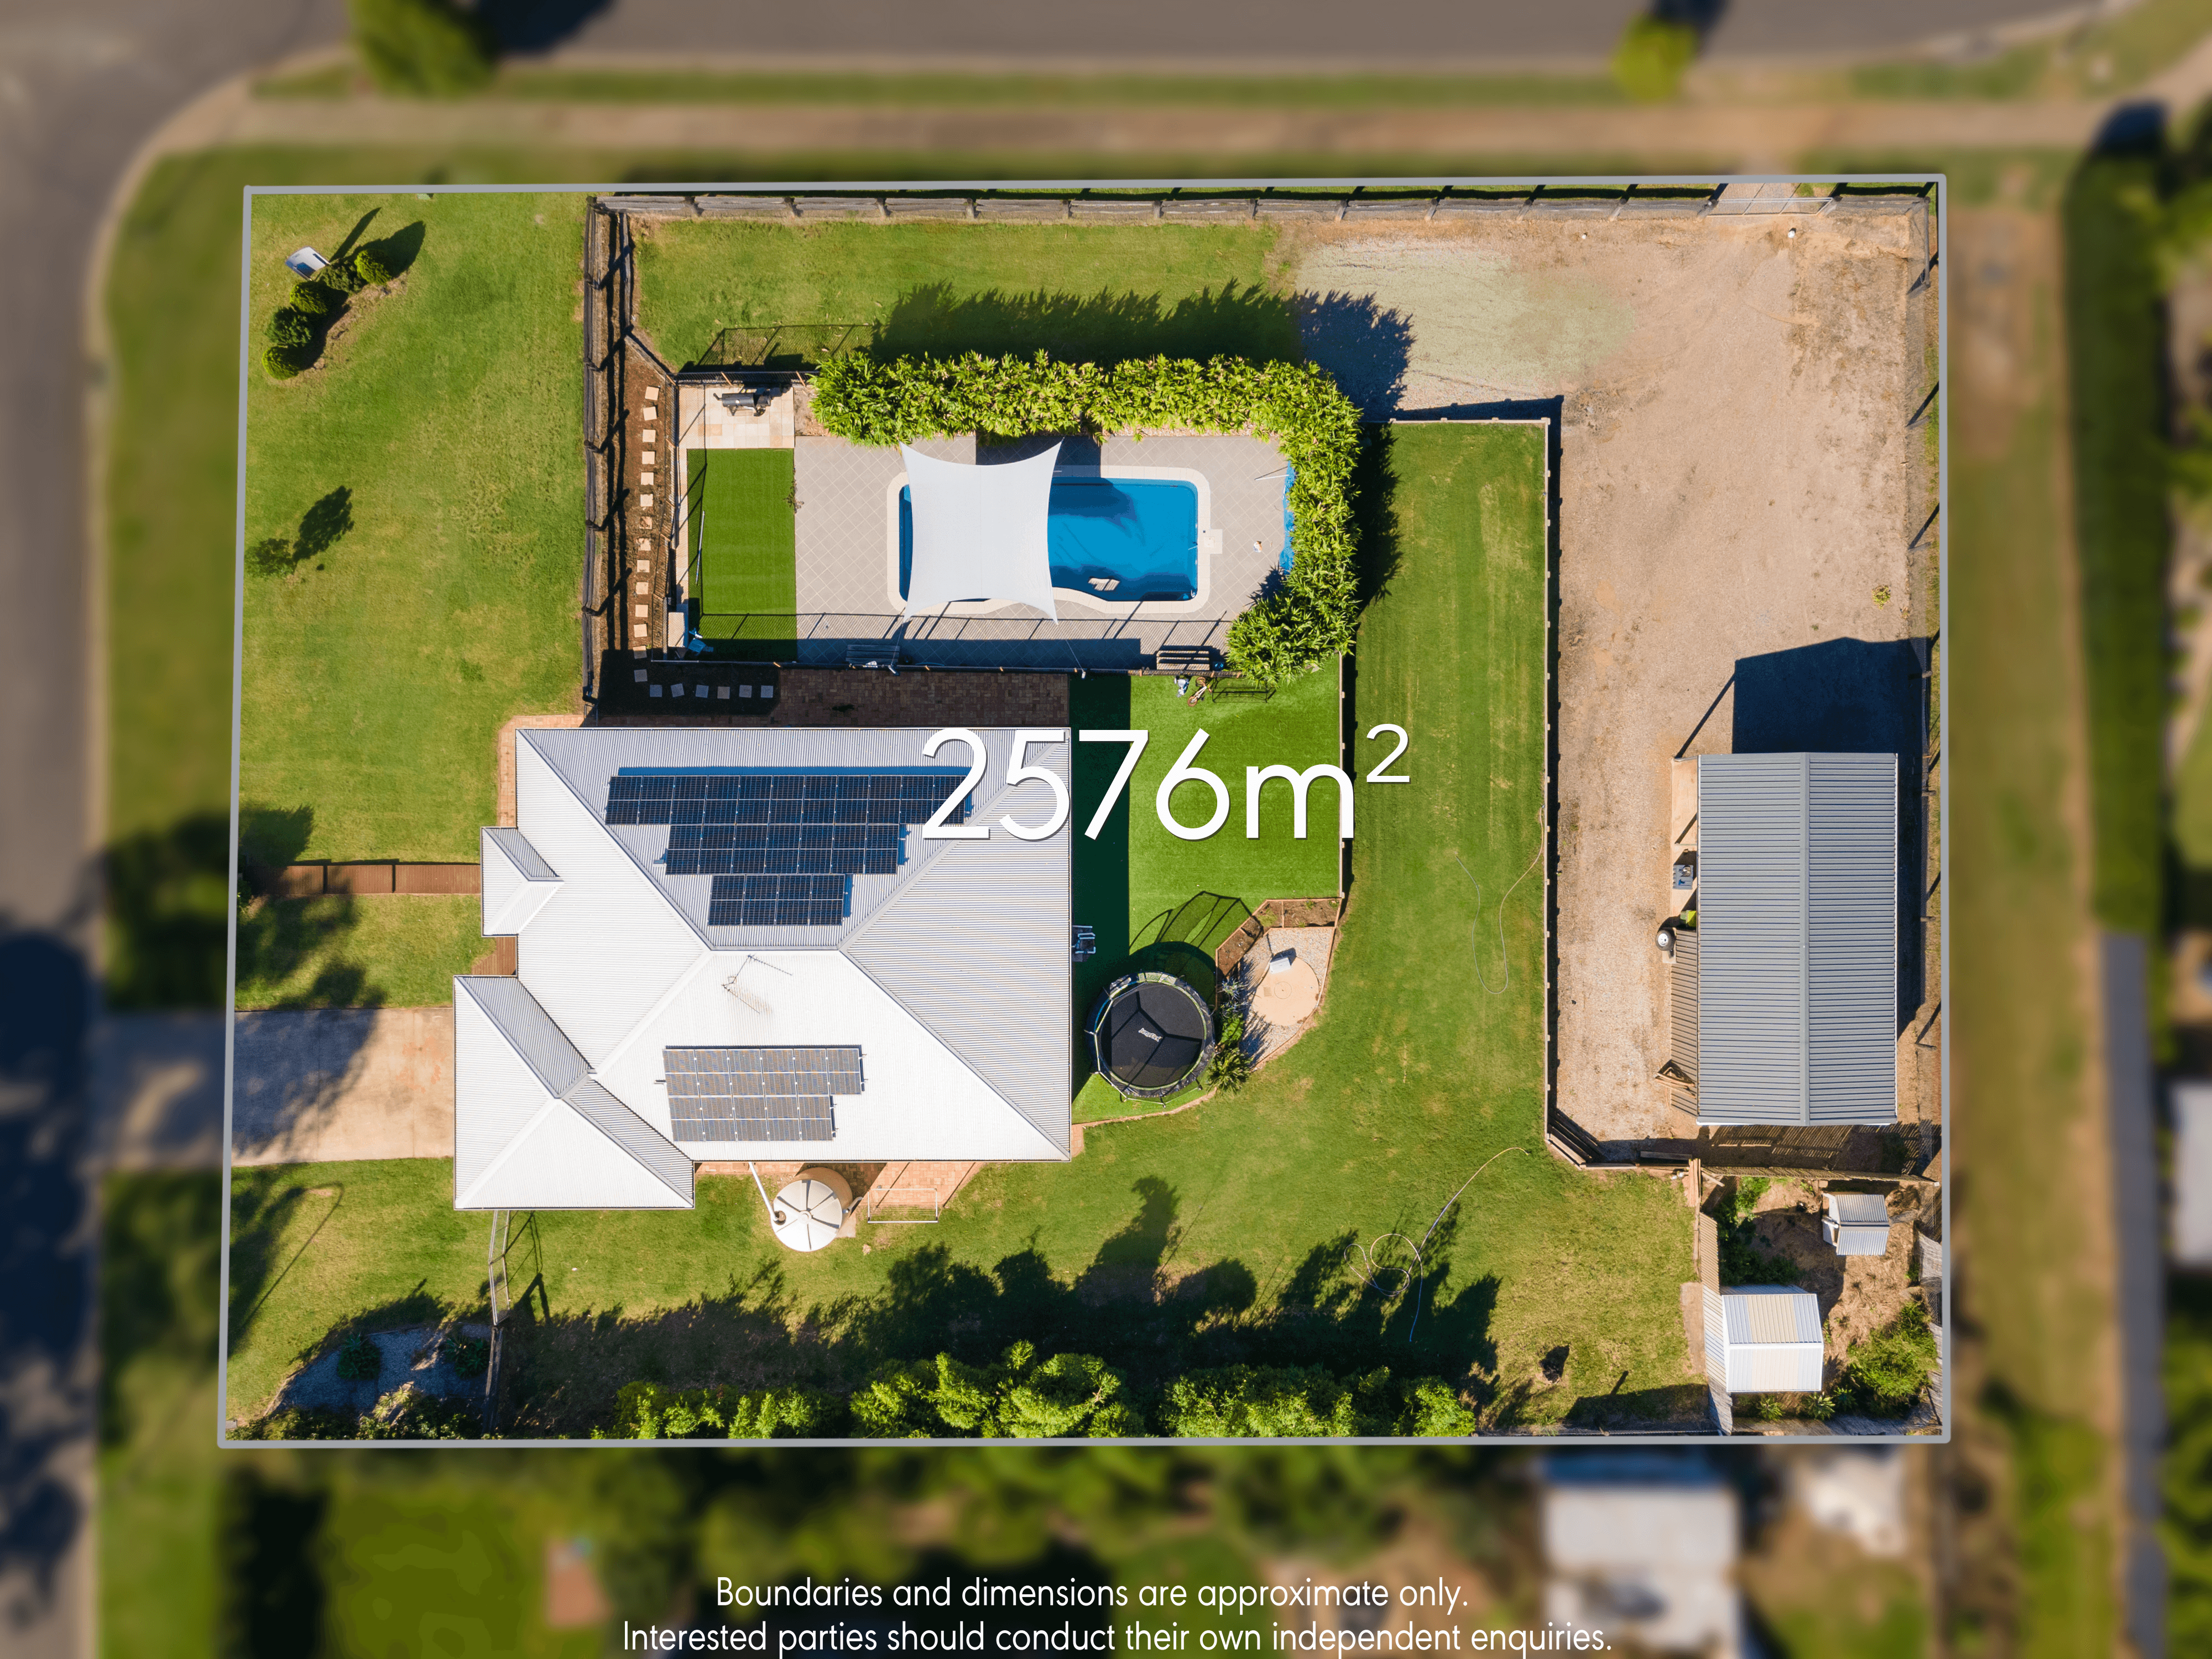 1 Pepperwood Place, WITHCOTT, QLD 4352